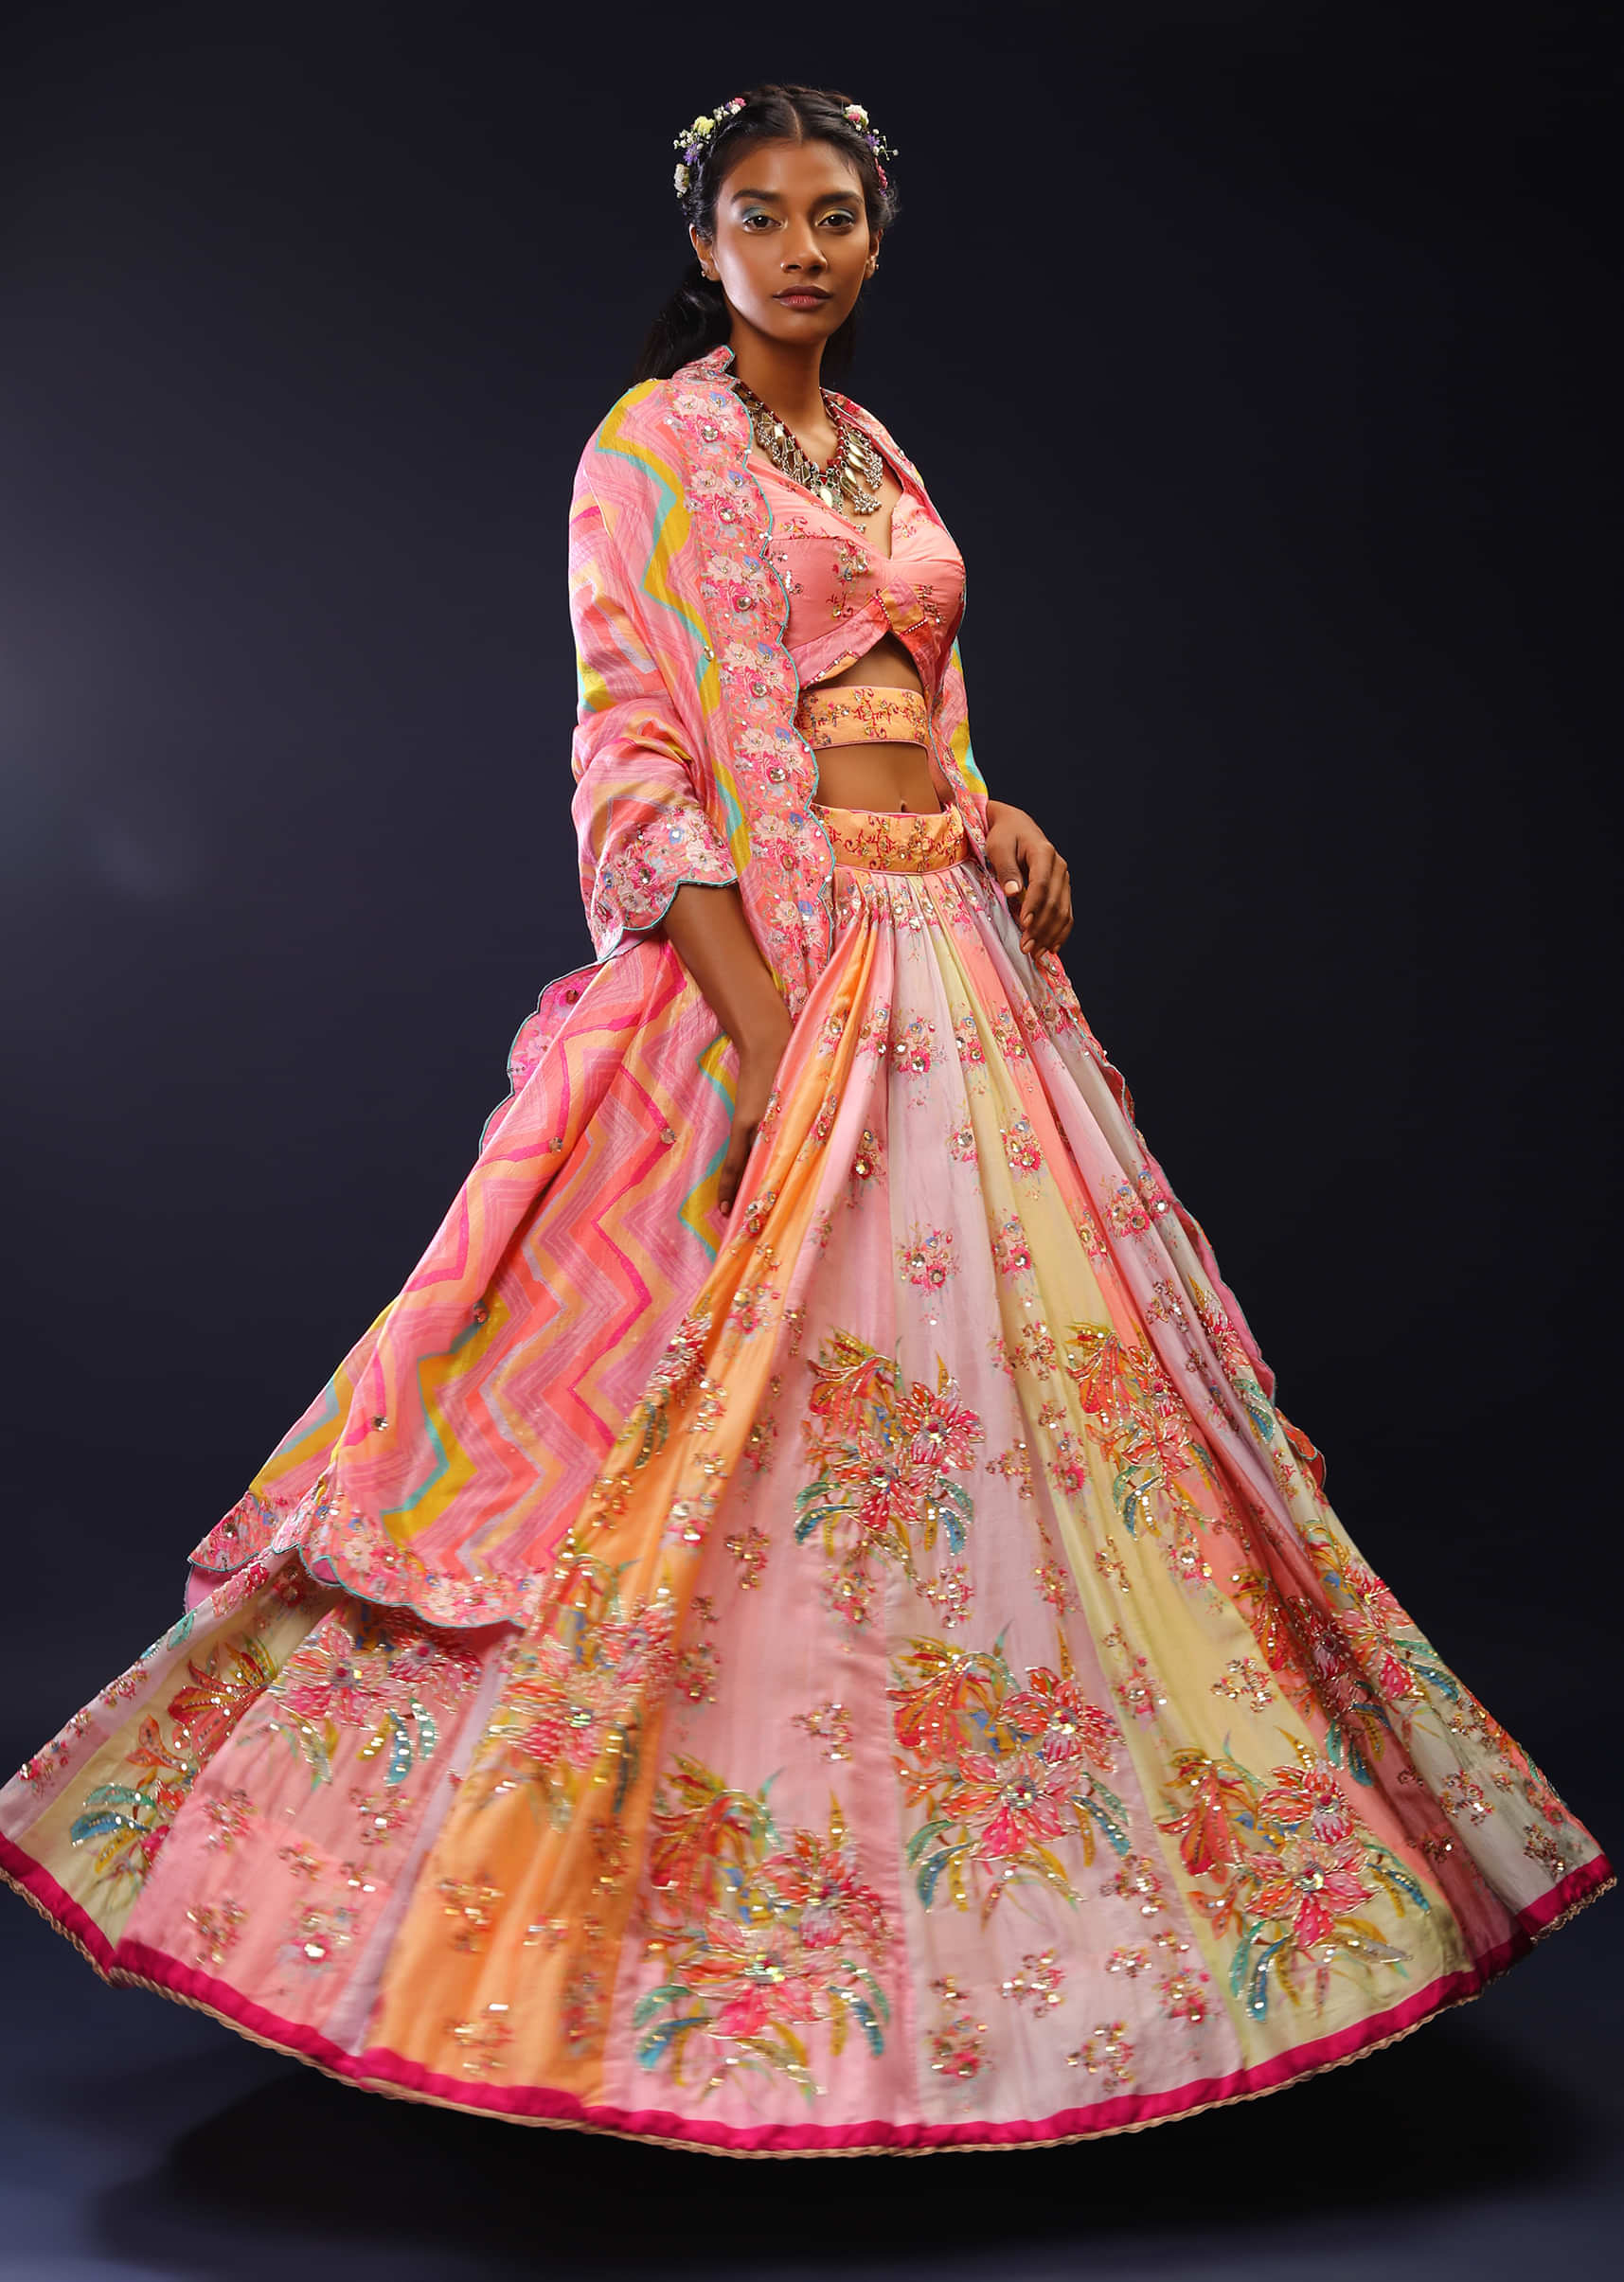 Multi Colored Panel Lehenga In Pastel Hues With Floral Print And Gotta Lace Embroidery